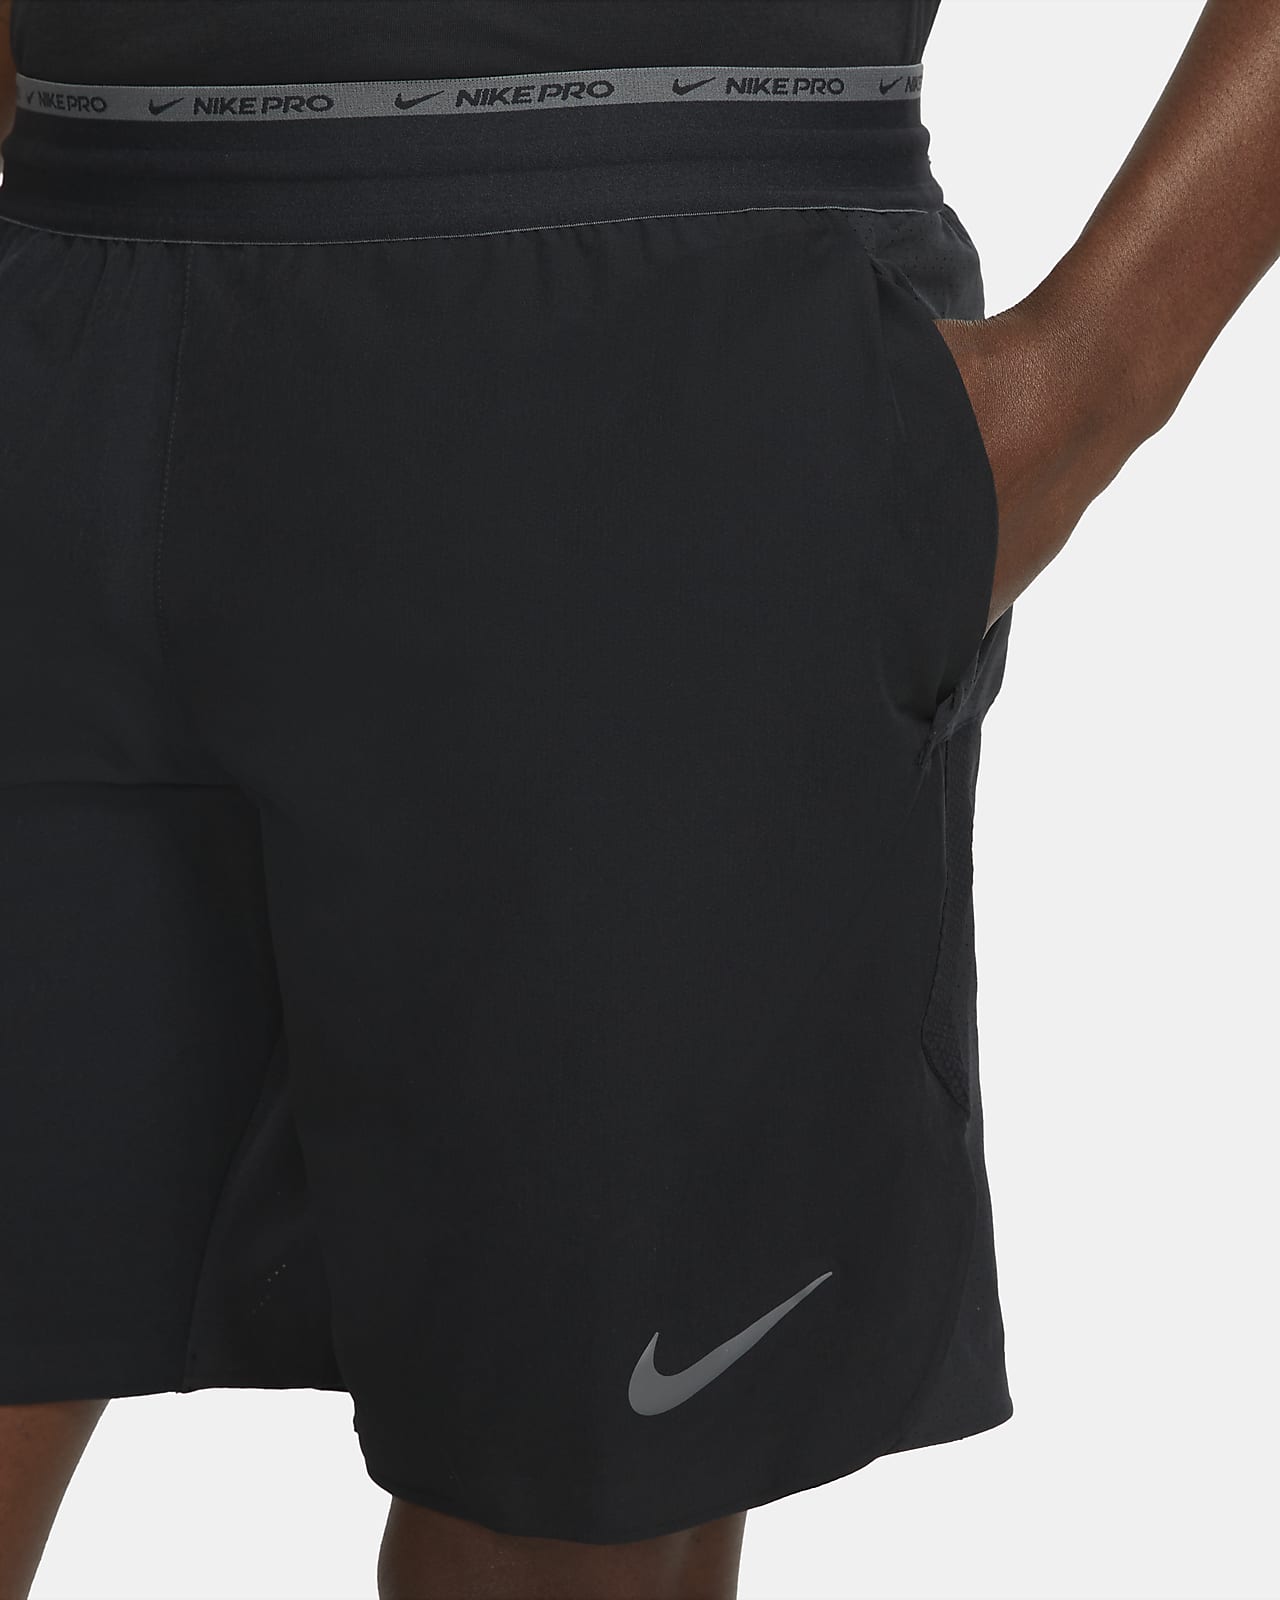 Nike Training Compression Shorts In Black 703084-010